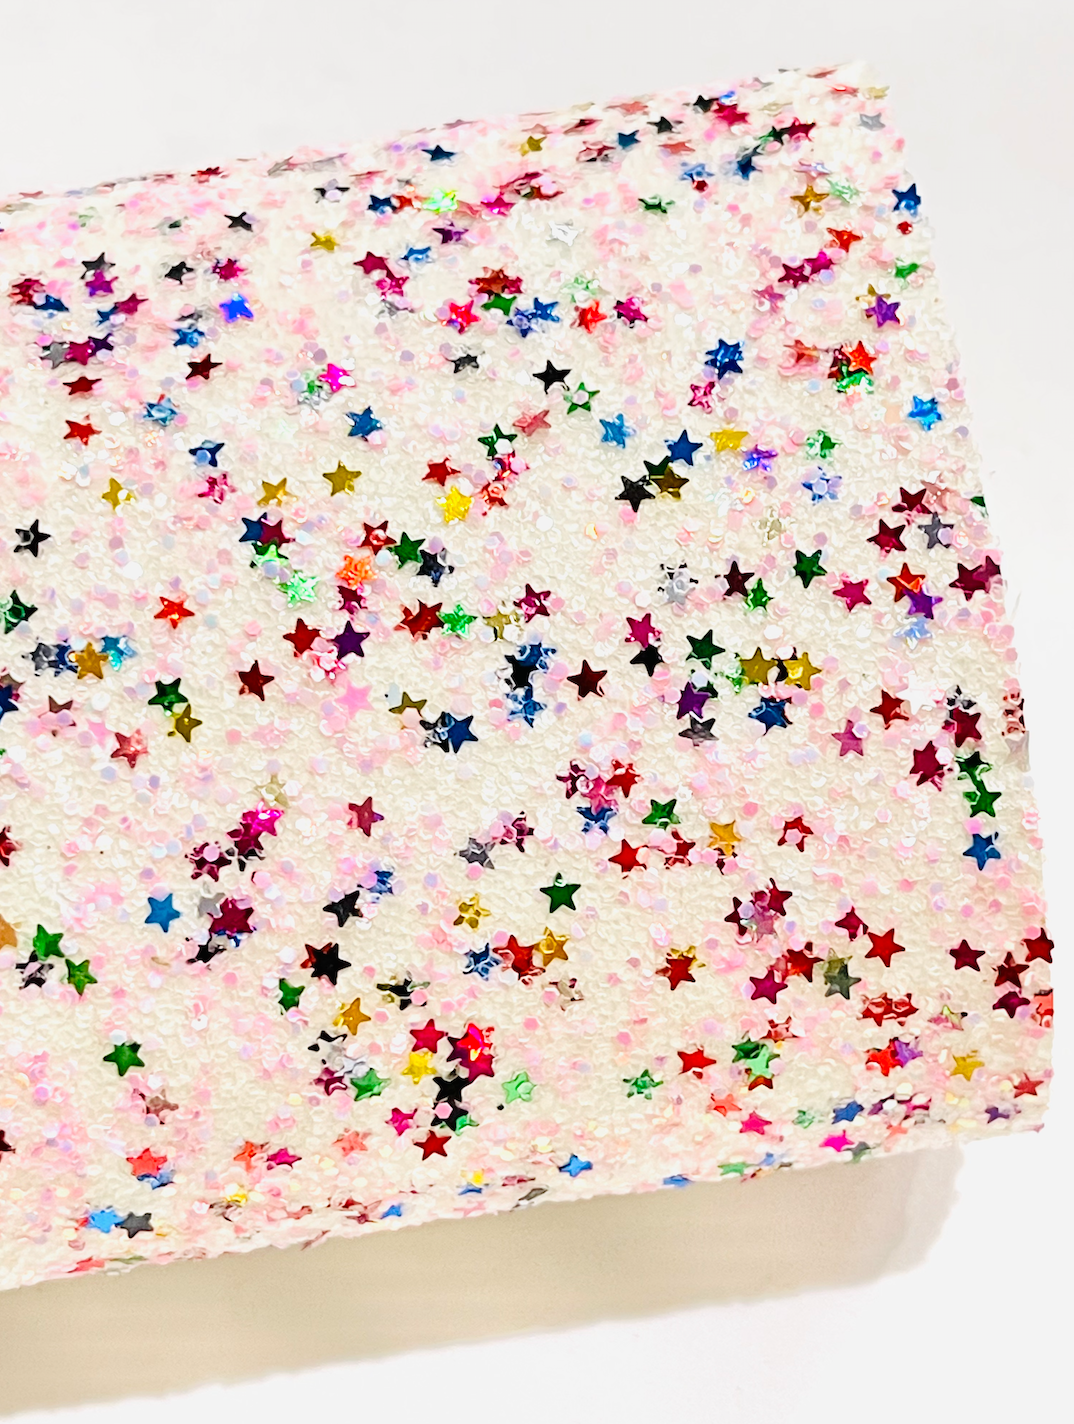 Light Pink and White Rainbow Stars Glitter Leather